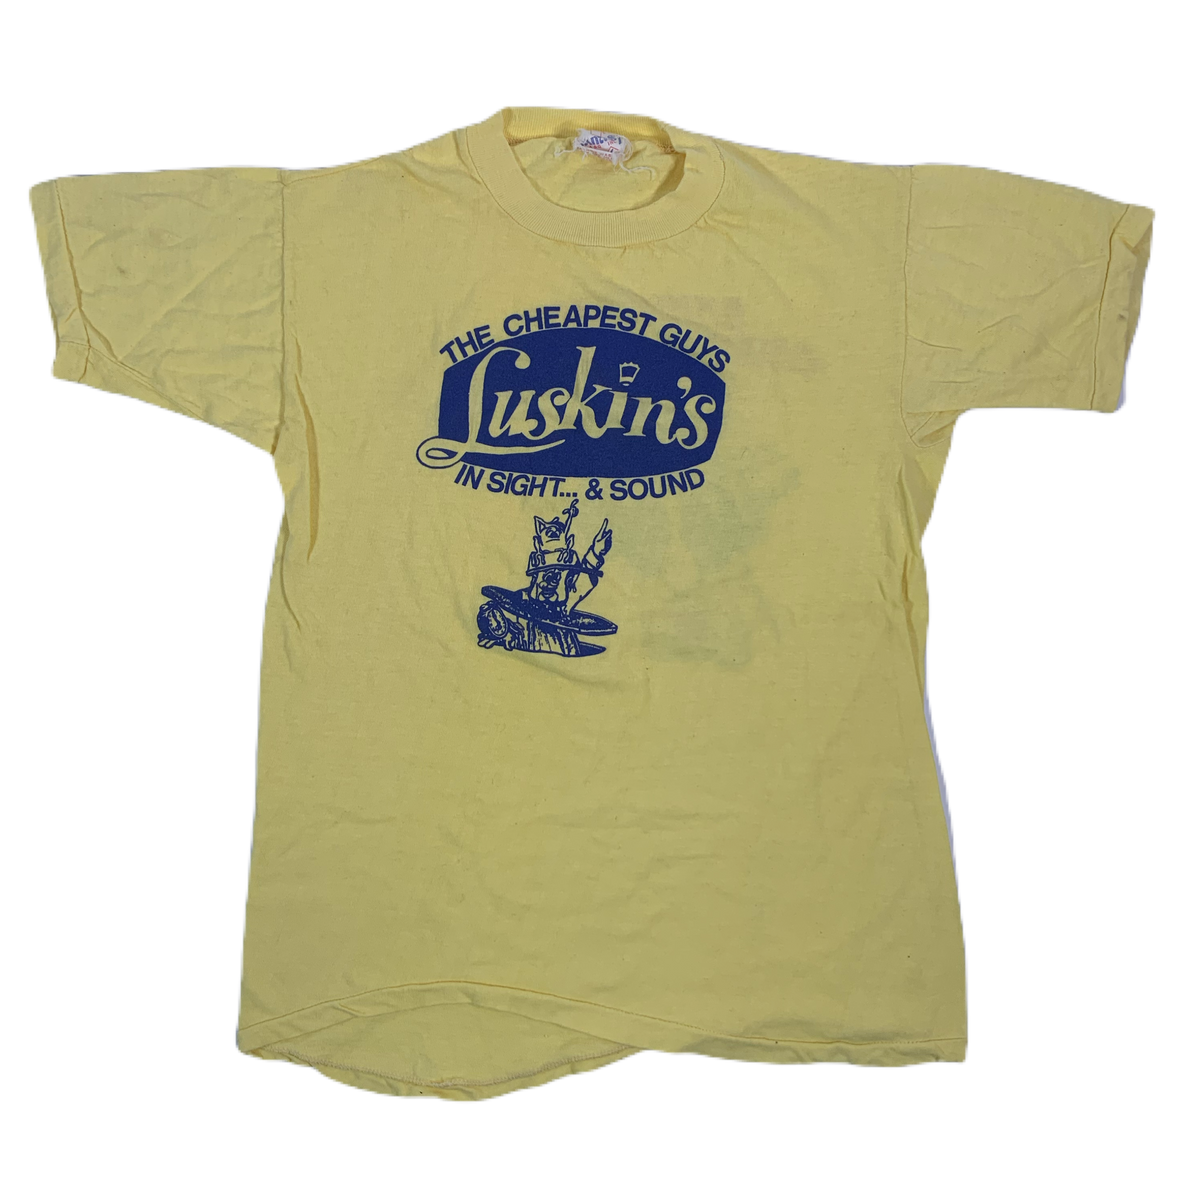 Vintage Luskins Audio Video Circus “The Cheapest” T-Shirt - jointcustodydc